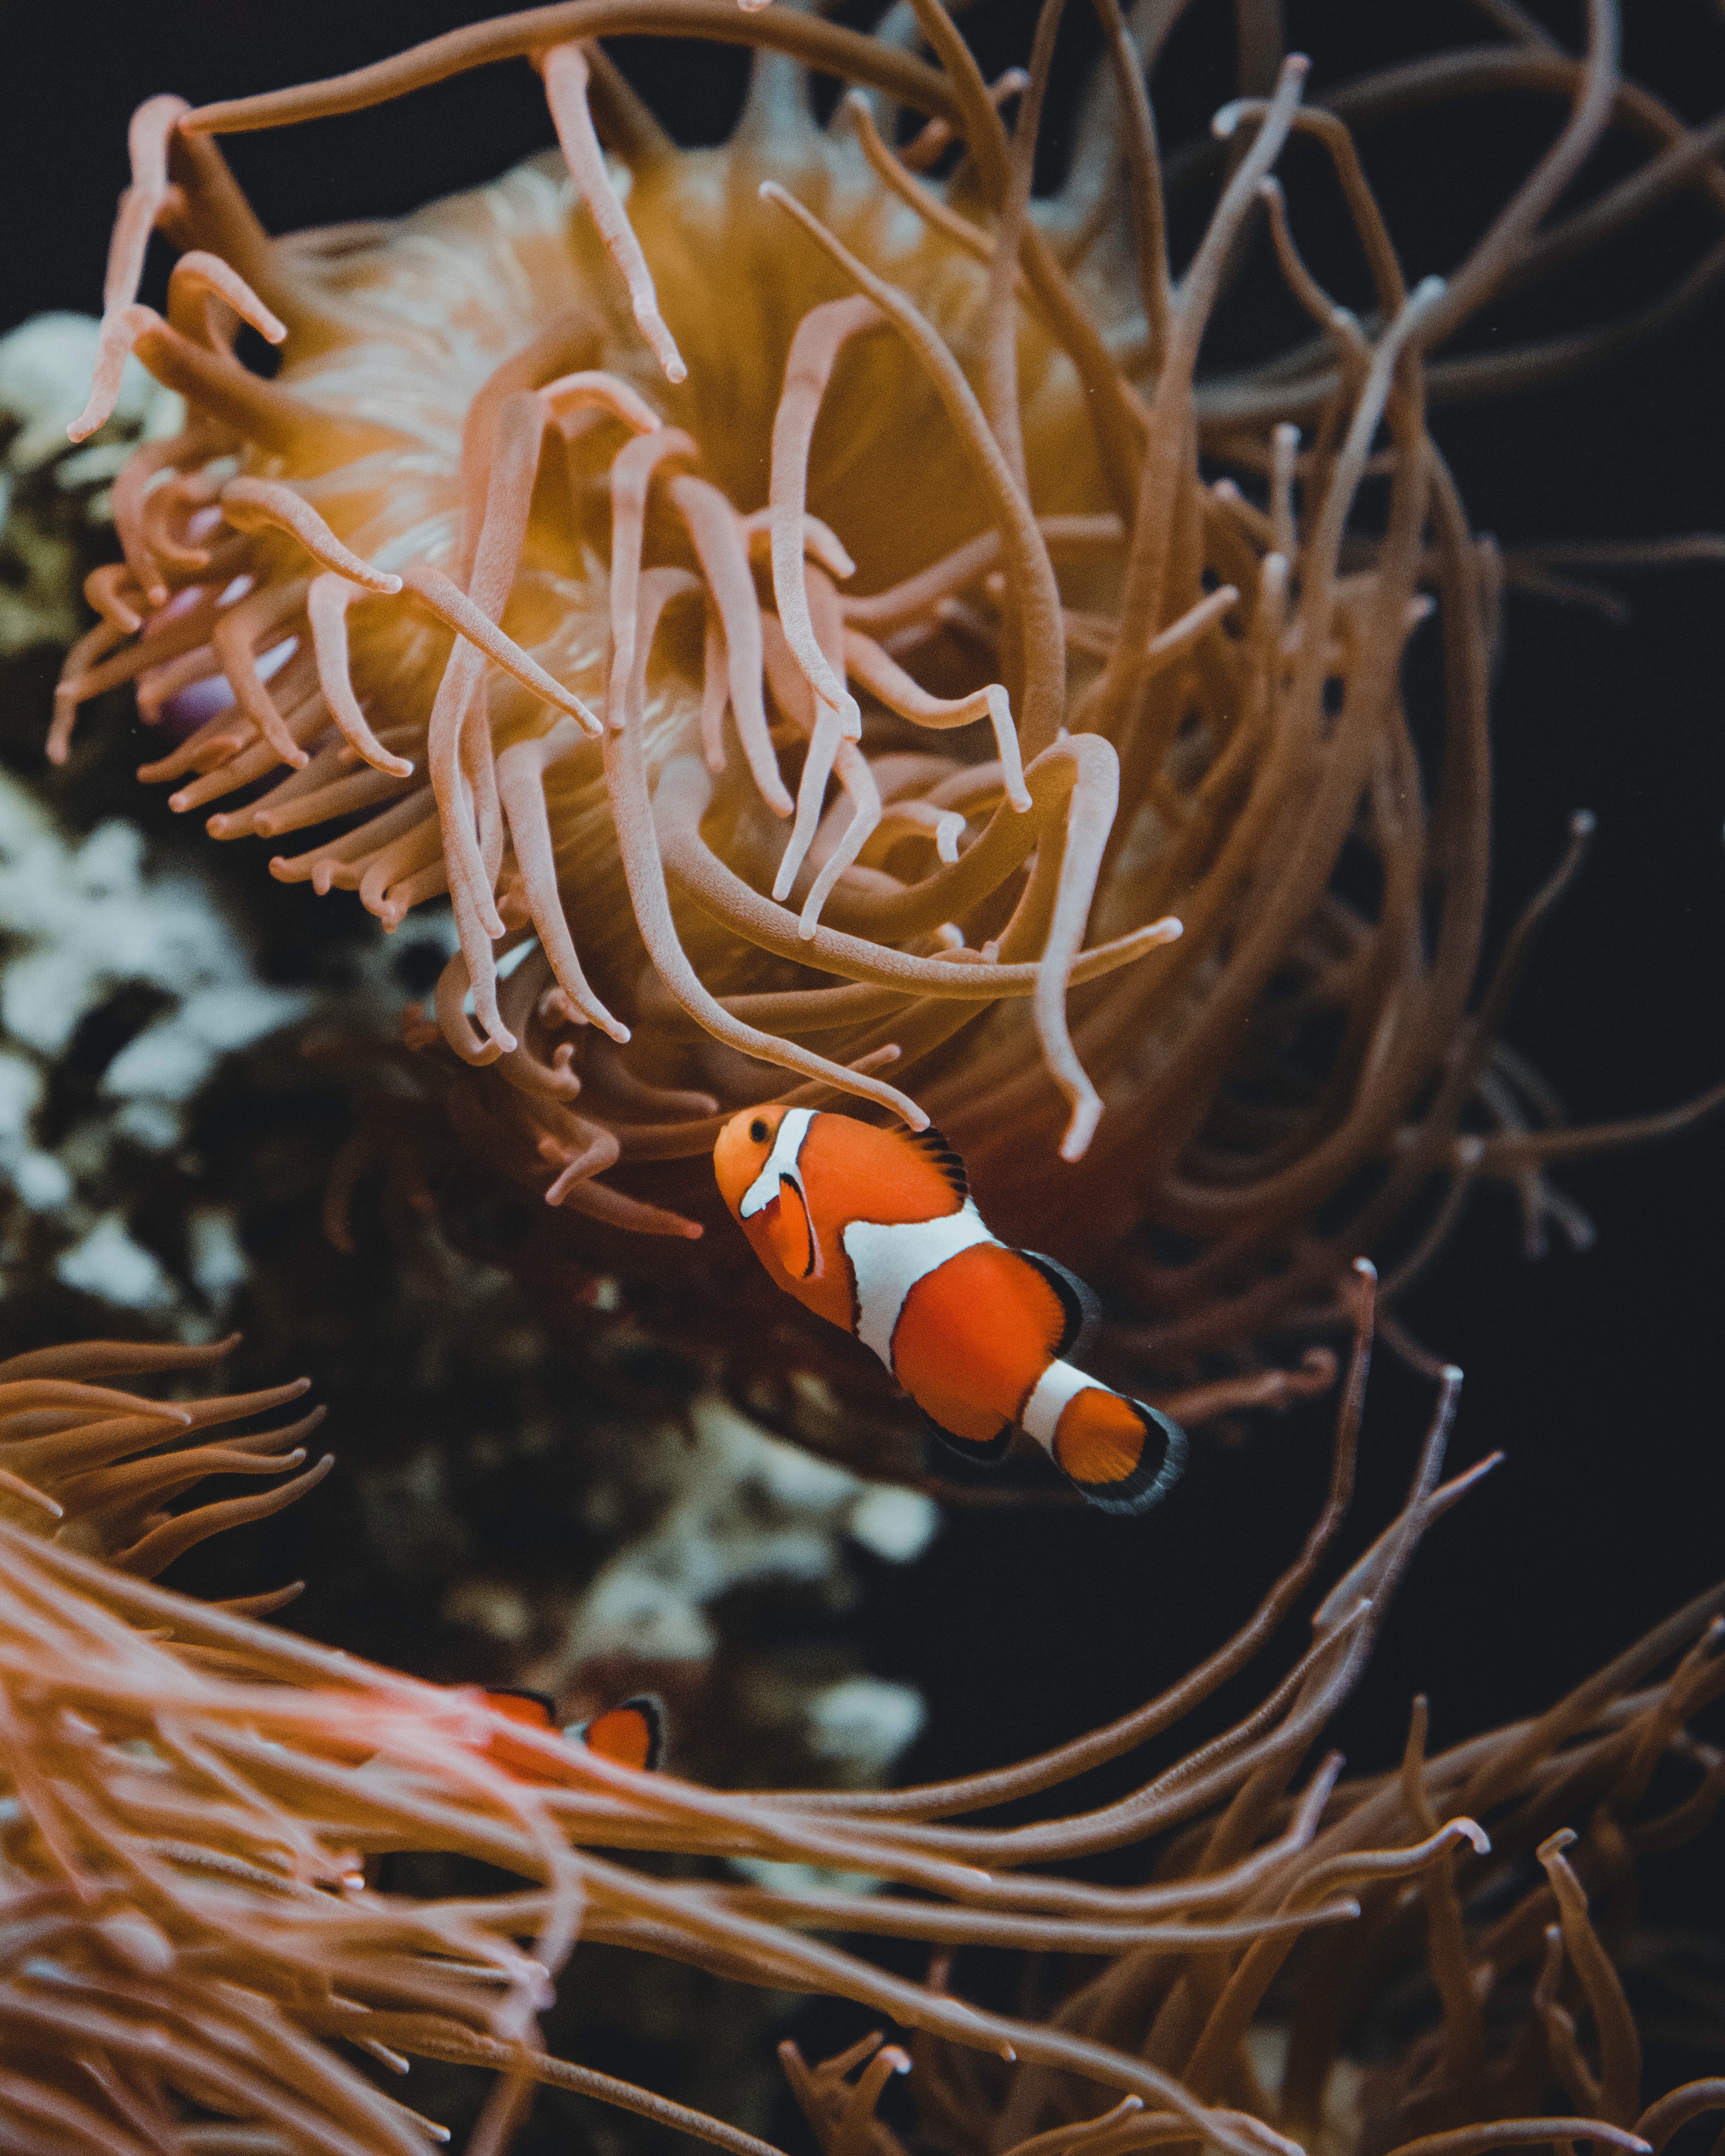 56583 Screensavers and Wallpapers Underwater for phone. Download animals, coral, clown fish, fish, seaweed, algae, underwater, submarine, fish clown, reef pictures for free